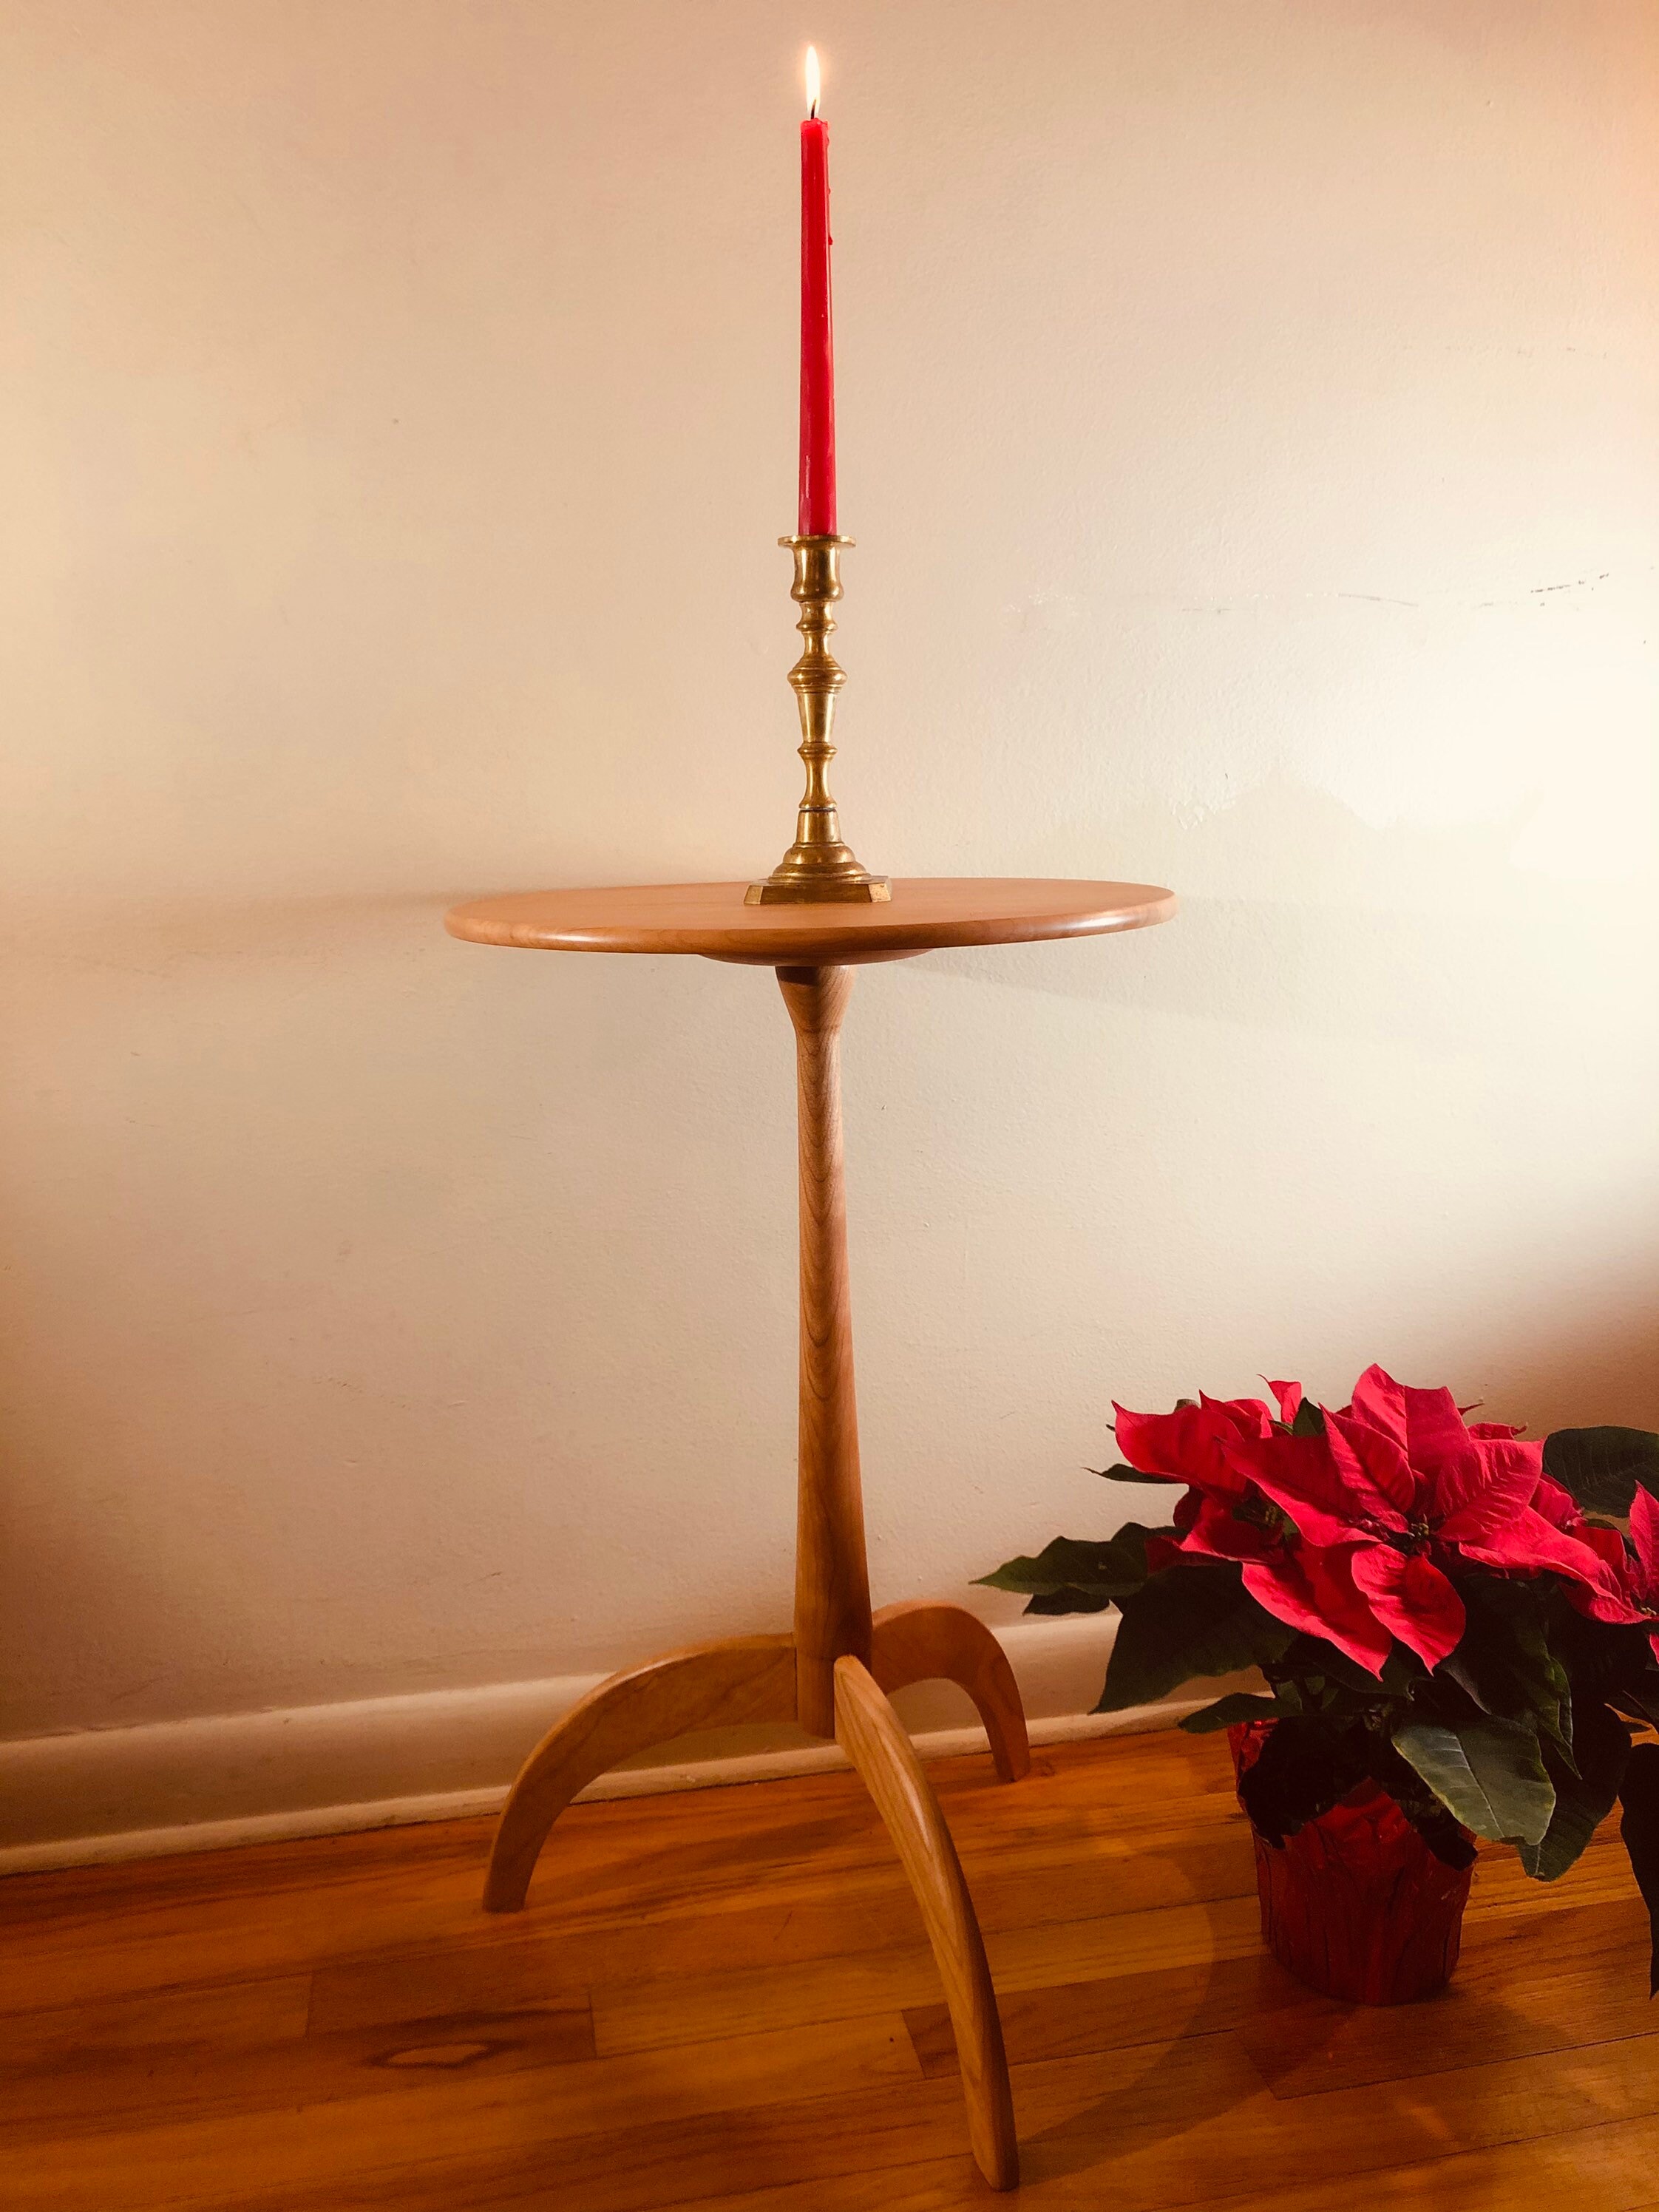 Reproduction Furniture: Candle Stand Table – The Shops at Shaker